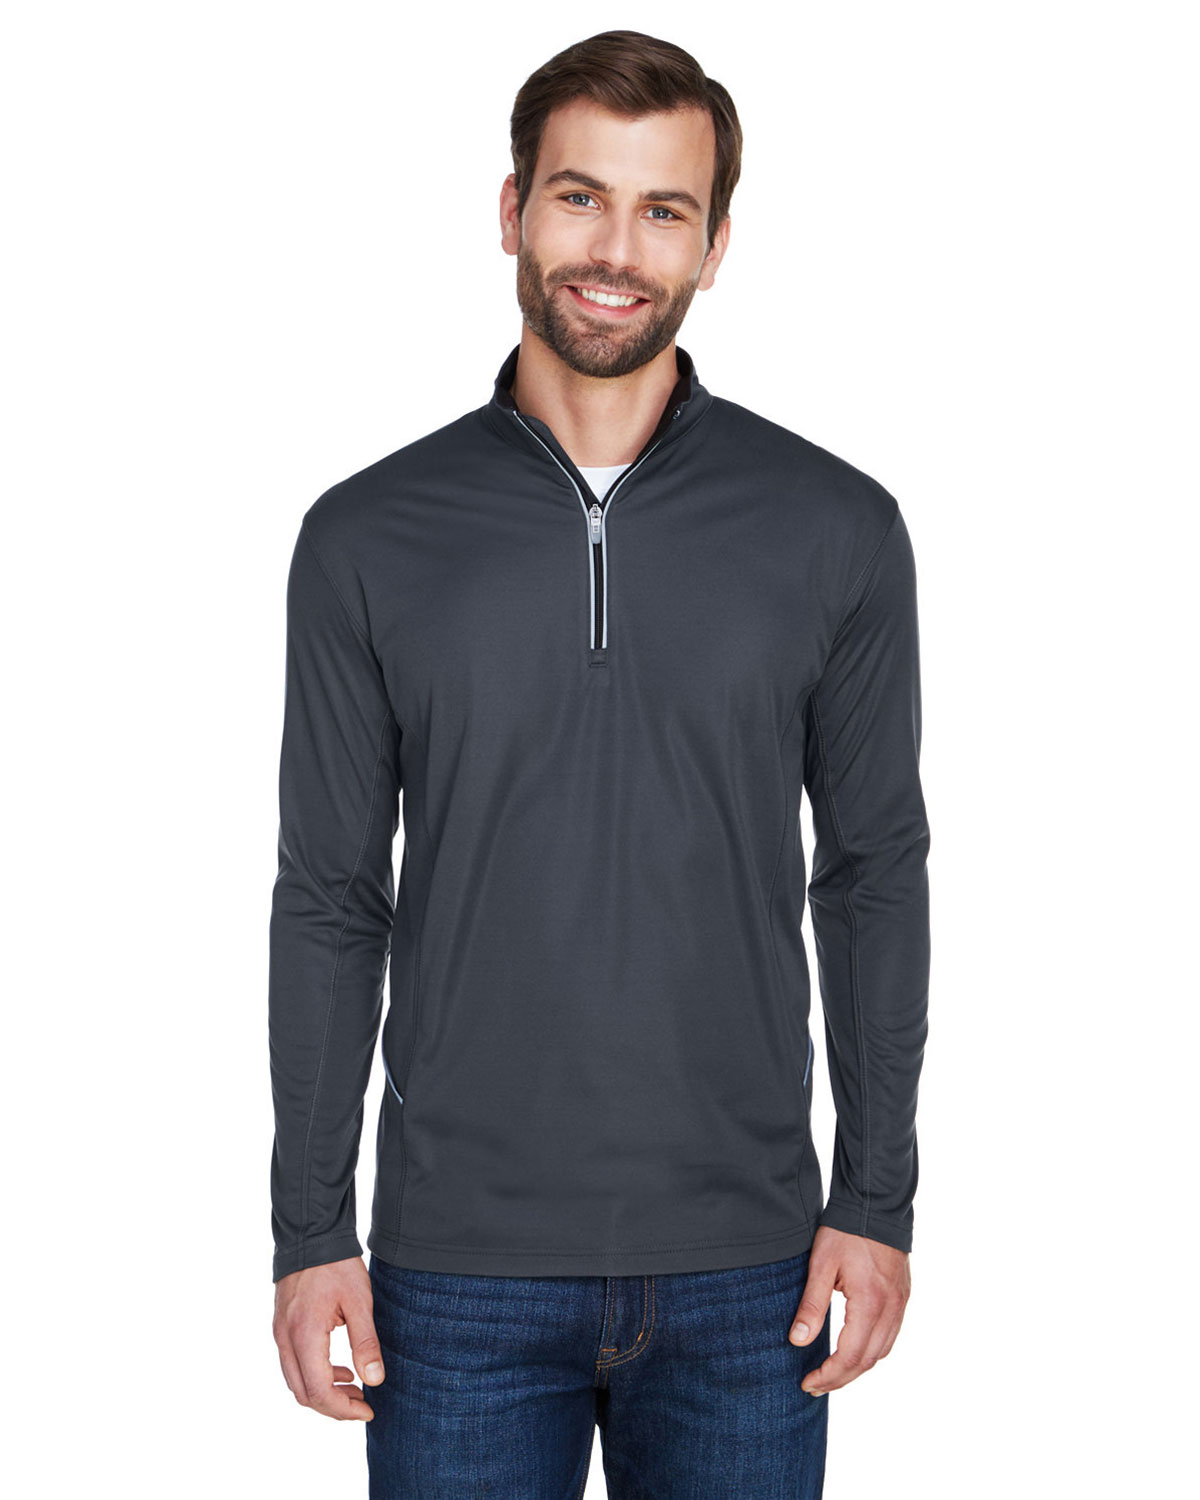 UltraClub 8230 Adult Cool & Dry Sport 1/4-Zip Pullover at Apparelstation